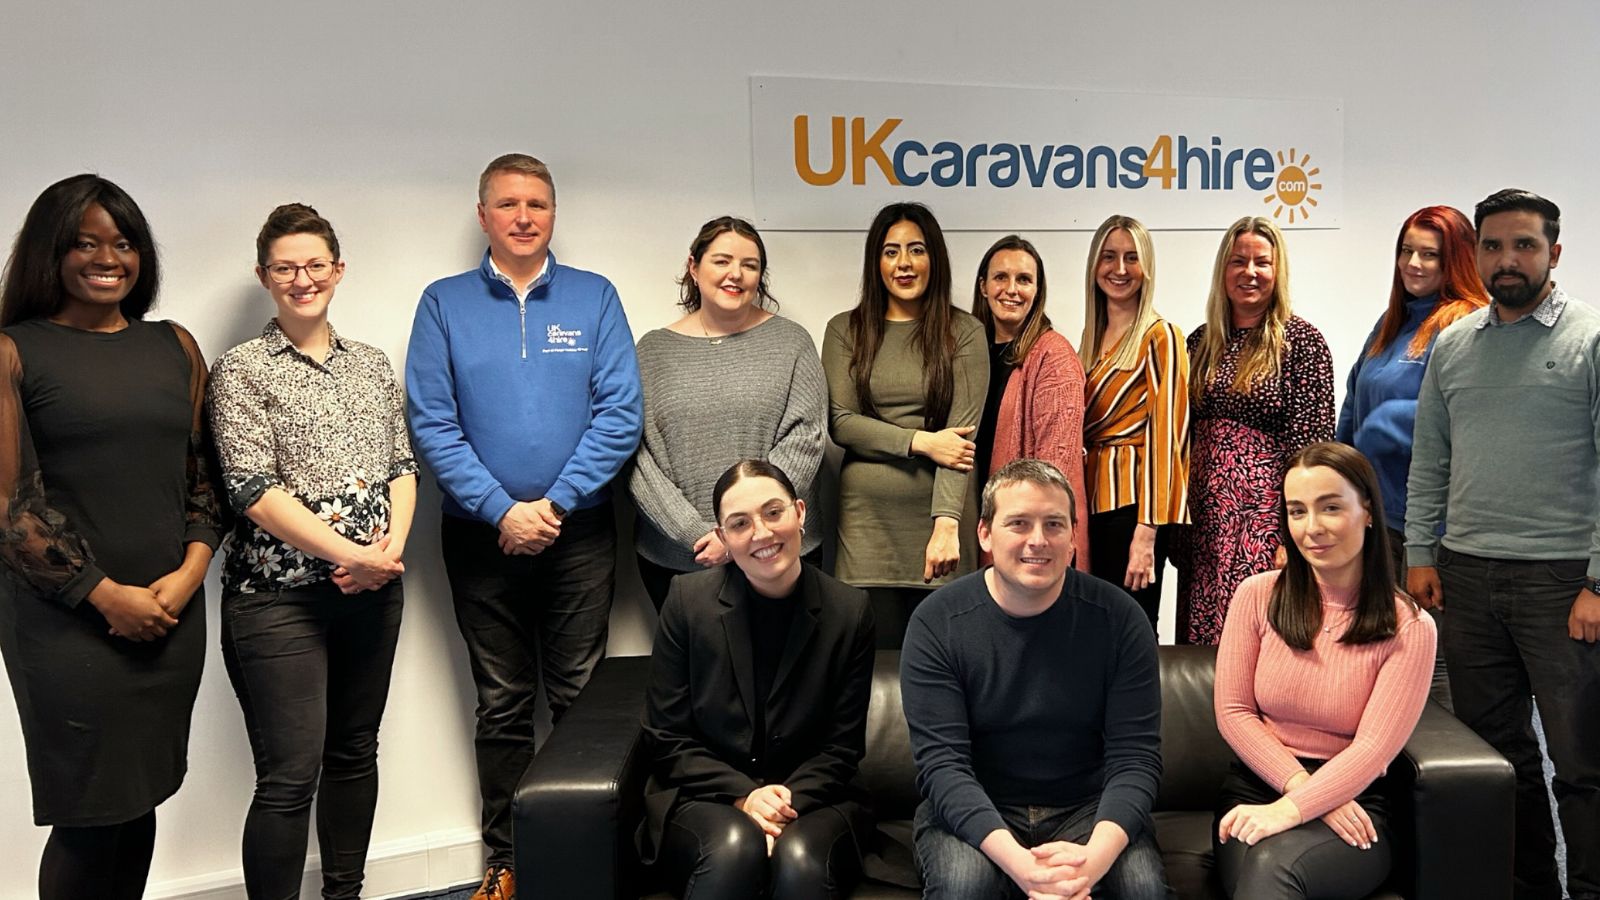 UKcaravans4hire.com reappoints Wild PR to support ambitious growth!